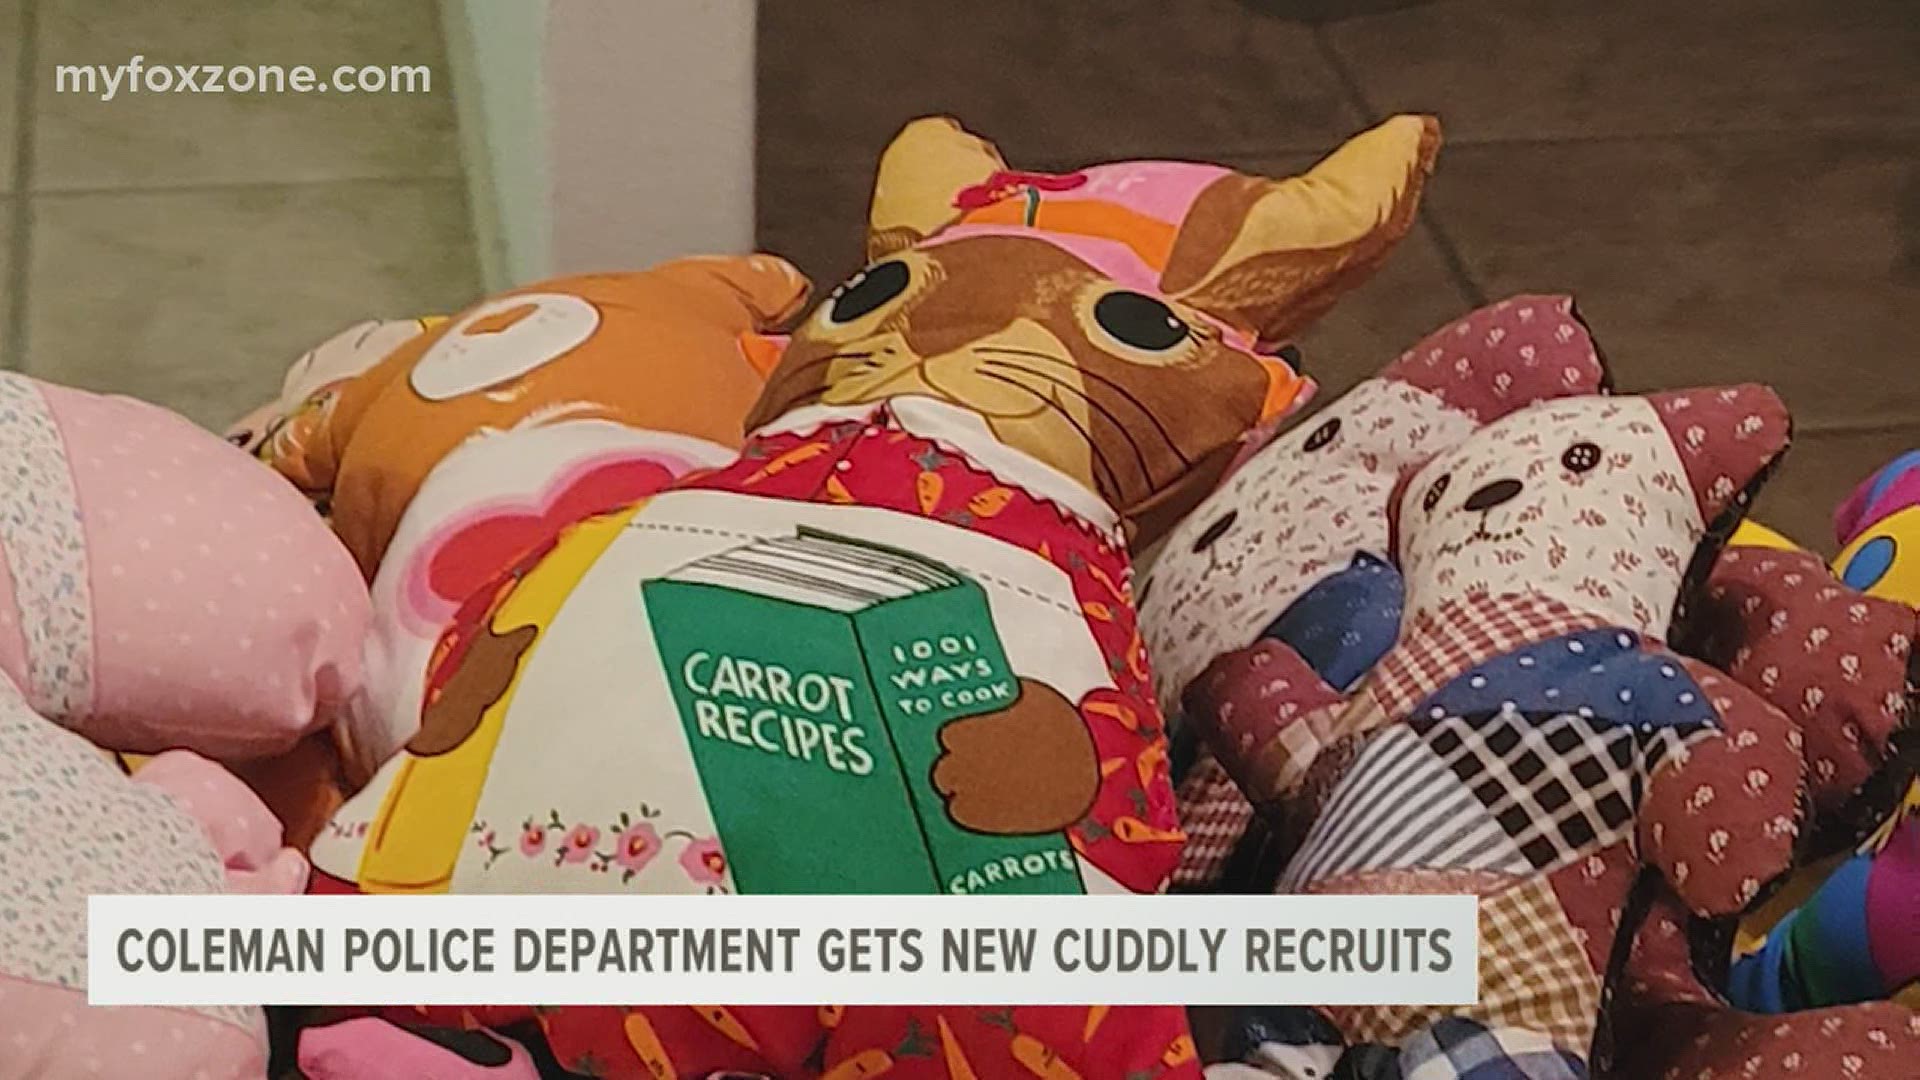 The Happy Creative Quilter club in Coleman donated 50 handmade stuffed animals for officers to give to children on their calls.